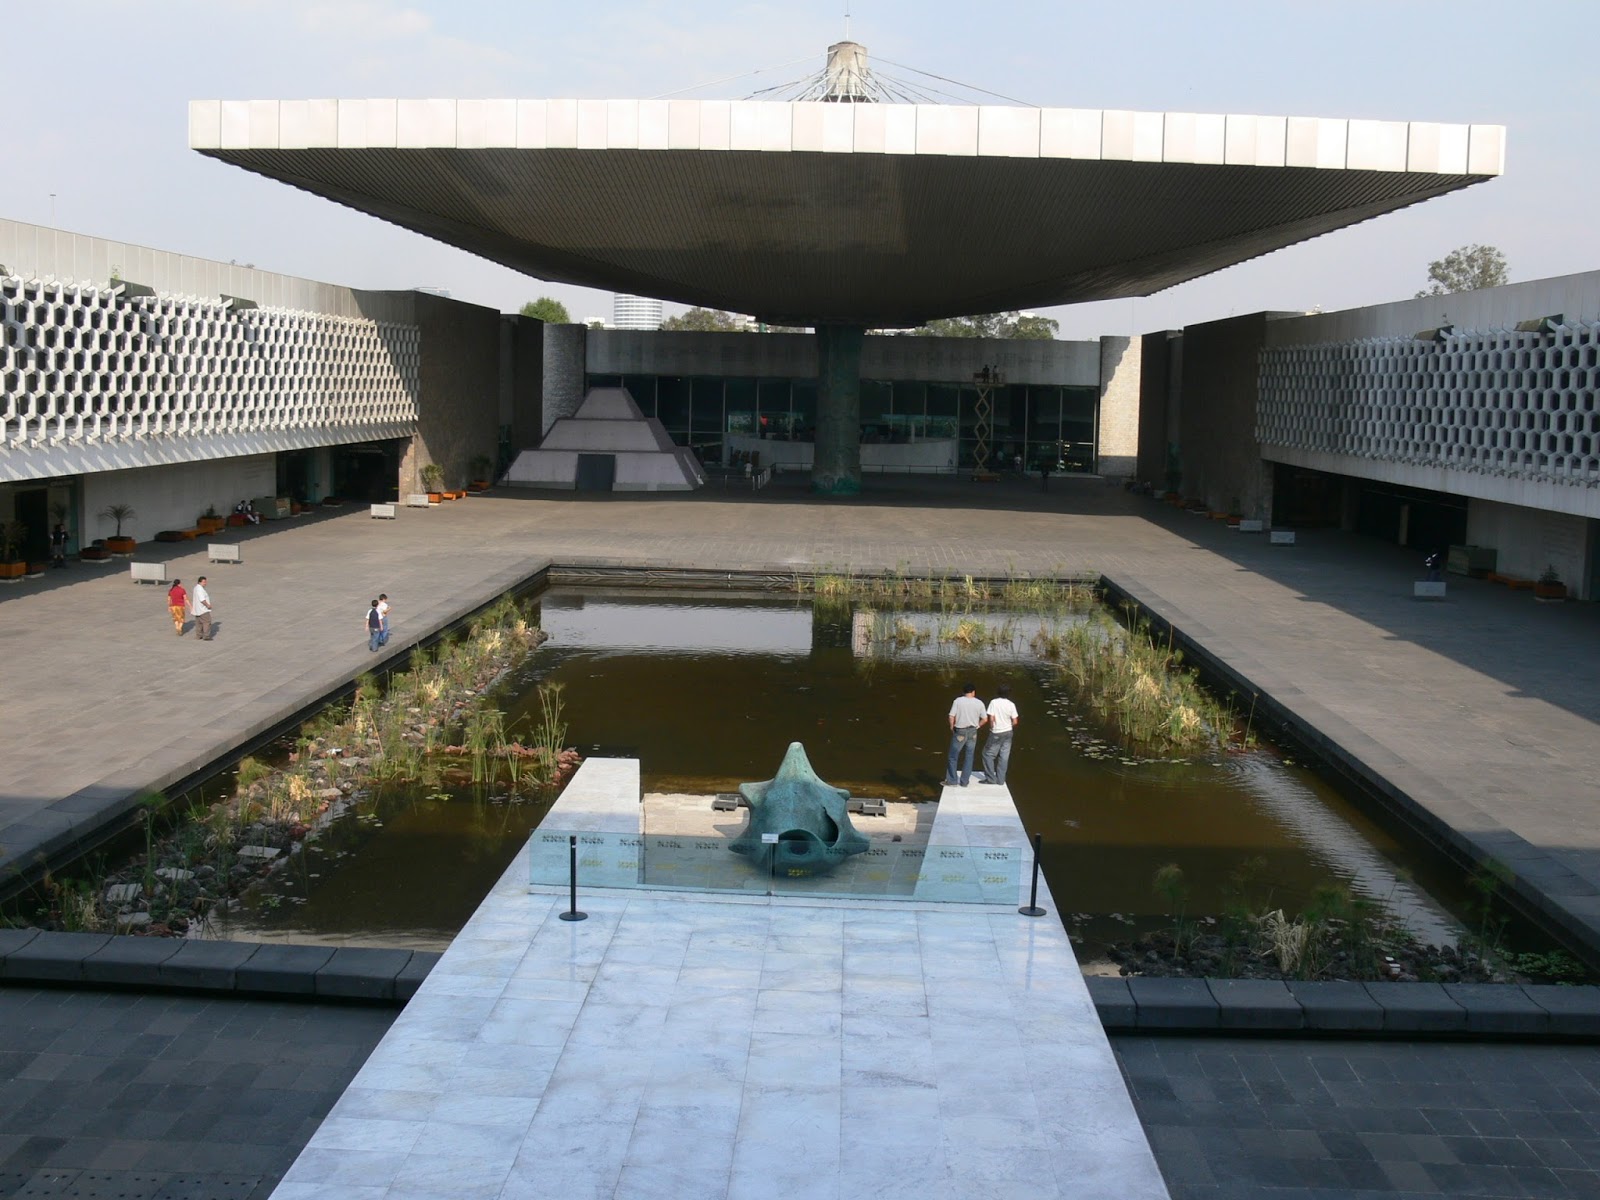 These Are The 25 Best Museums In The World - National Museum of Anthropology